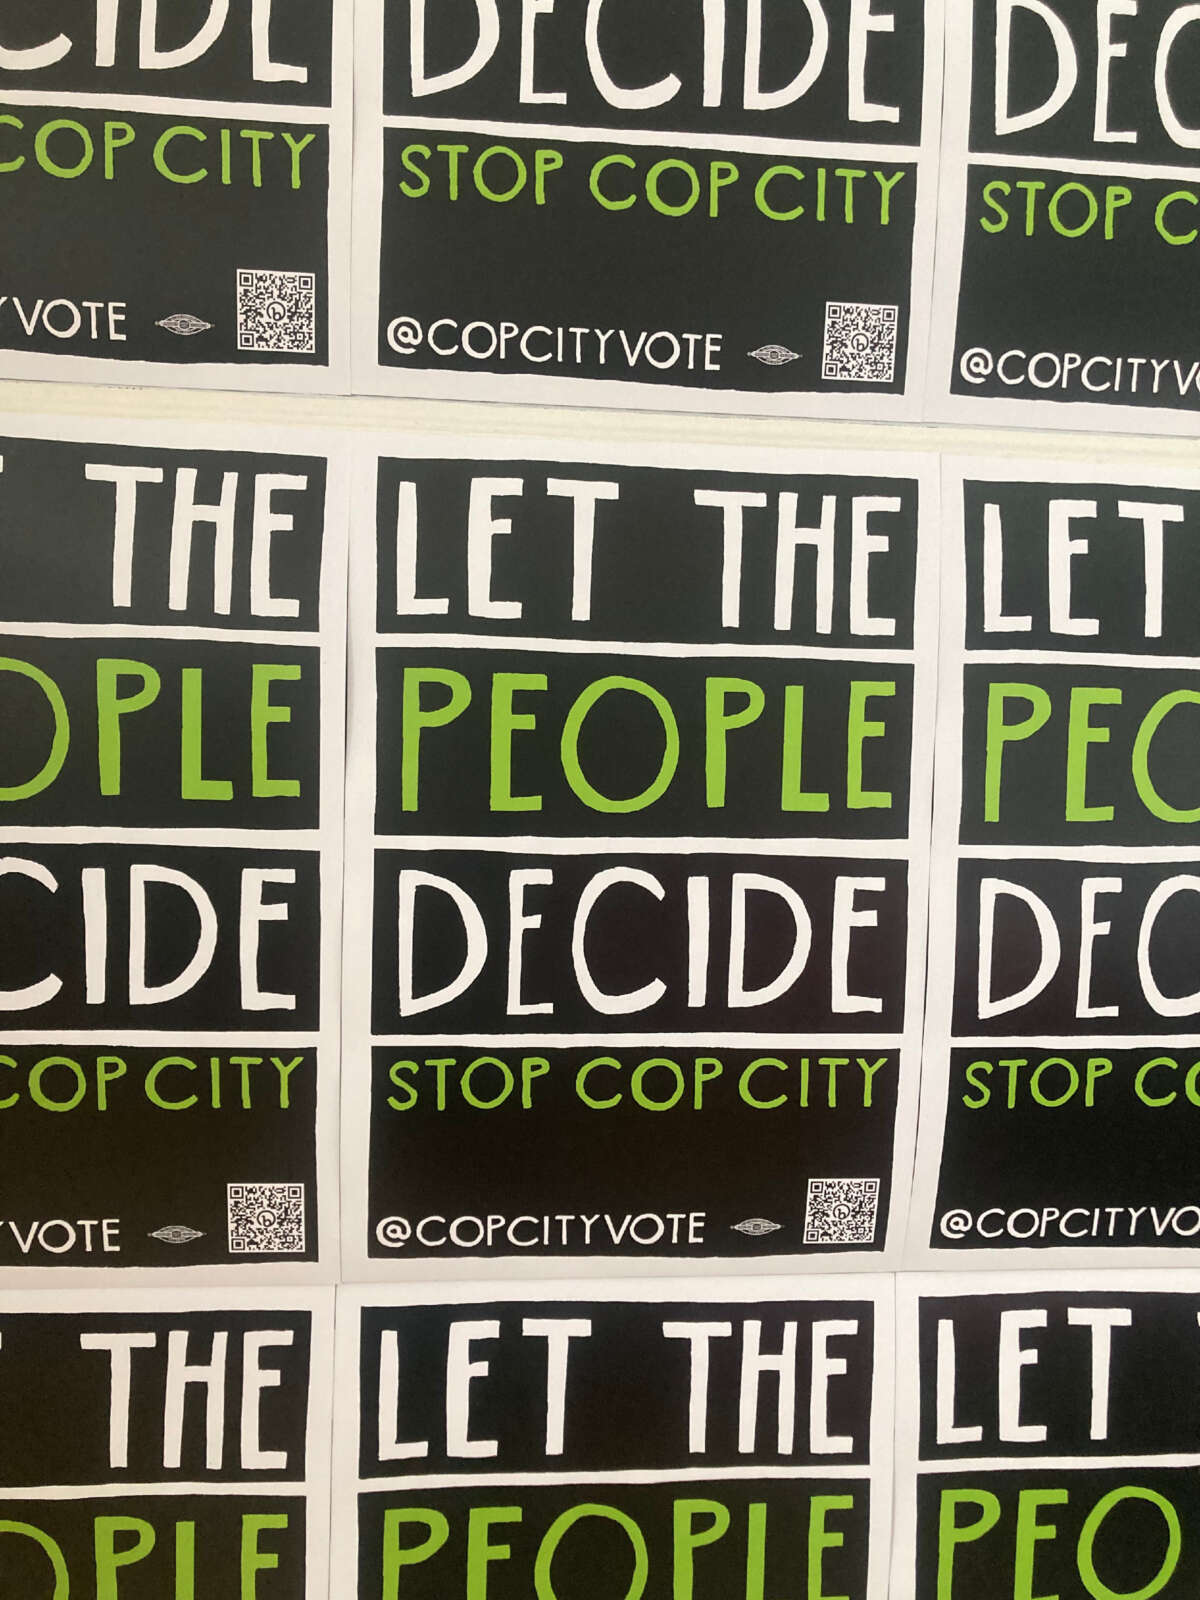 Vote to Stop Cop City posters